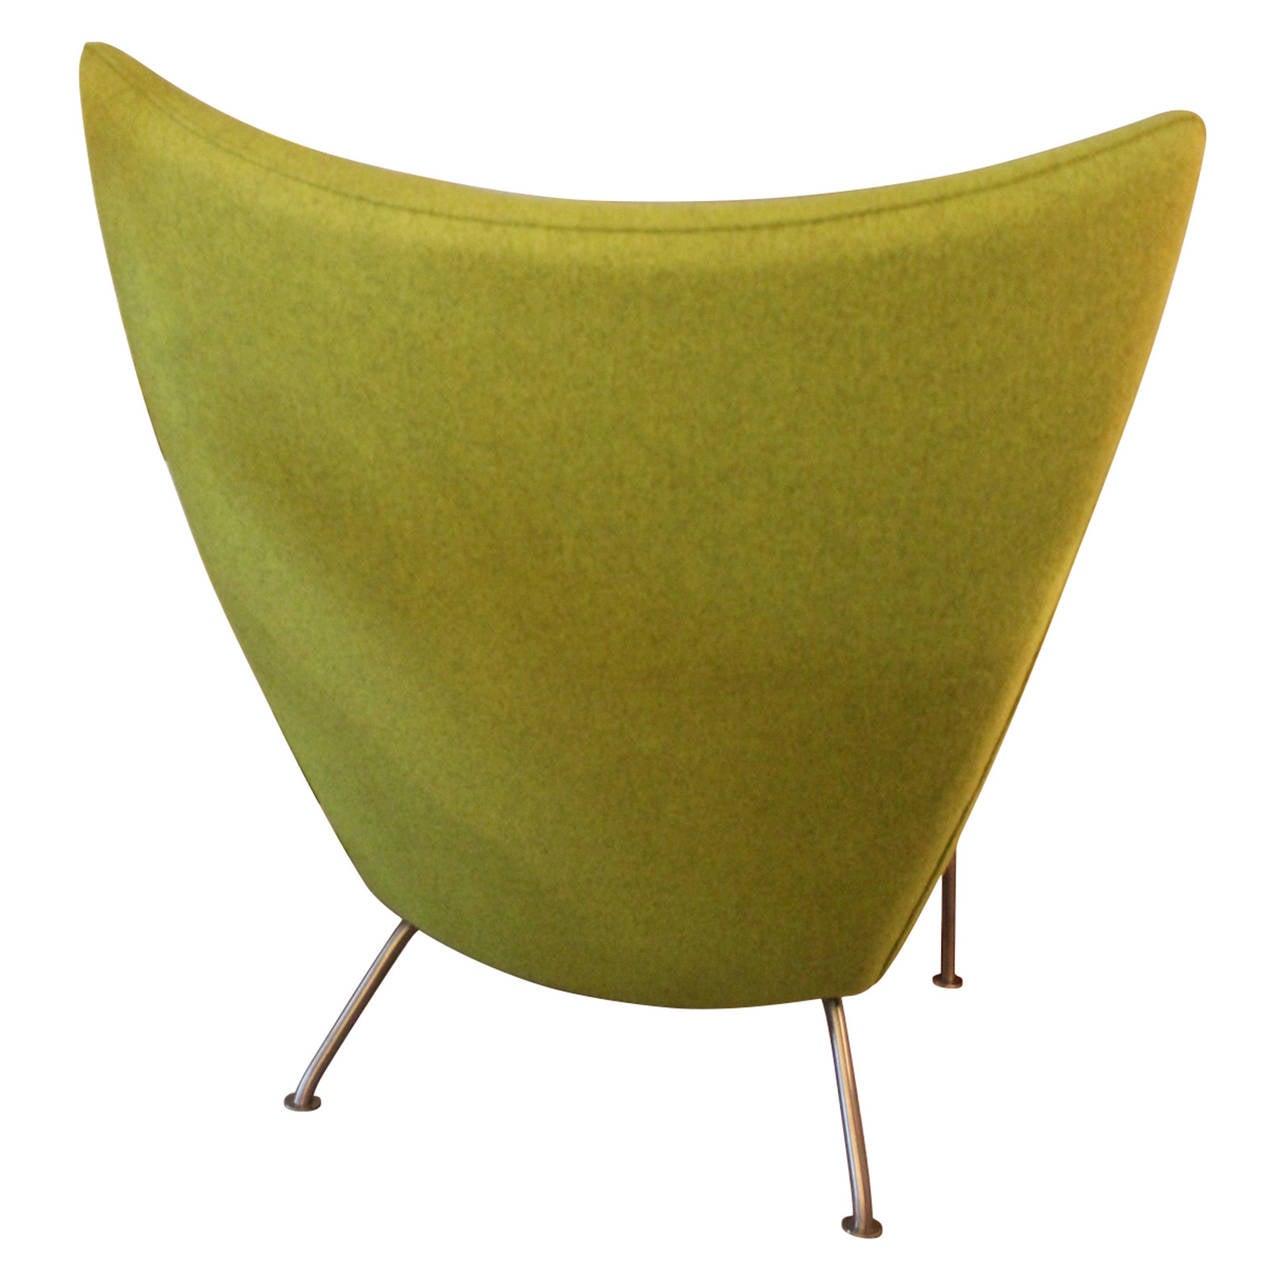 Hans J. Wegner Lounge Chair model 445. Design from 1960 and manufactured around 1990. Appears as new in apple-green colored wool.